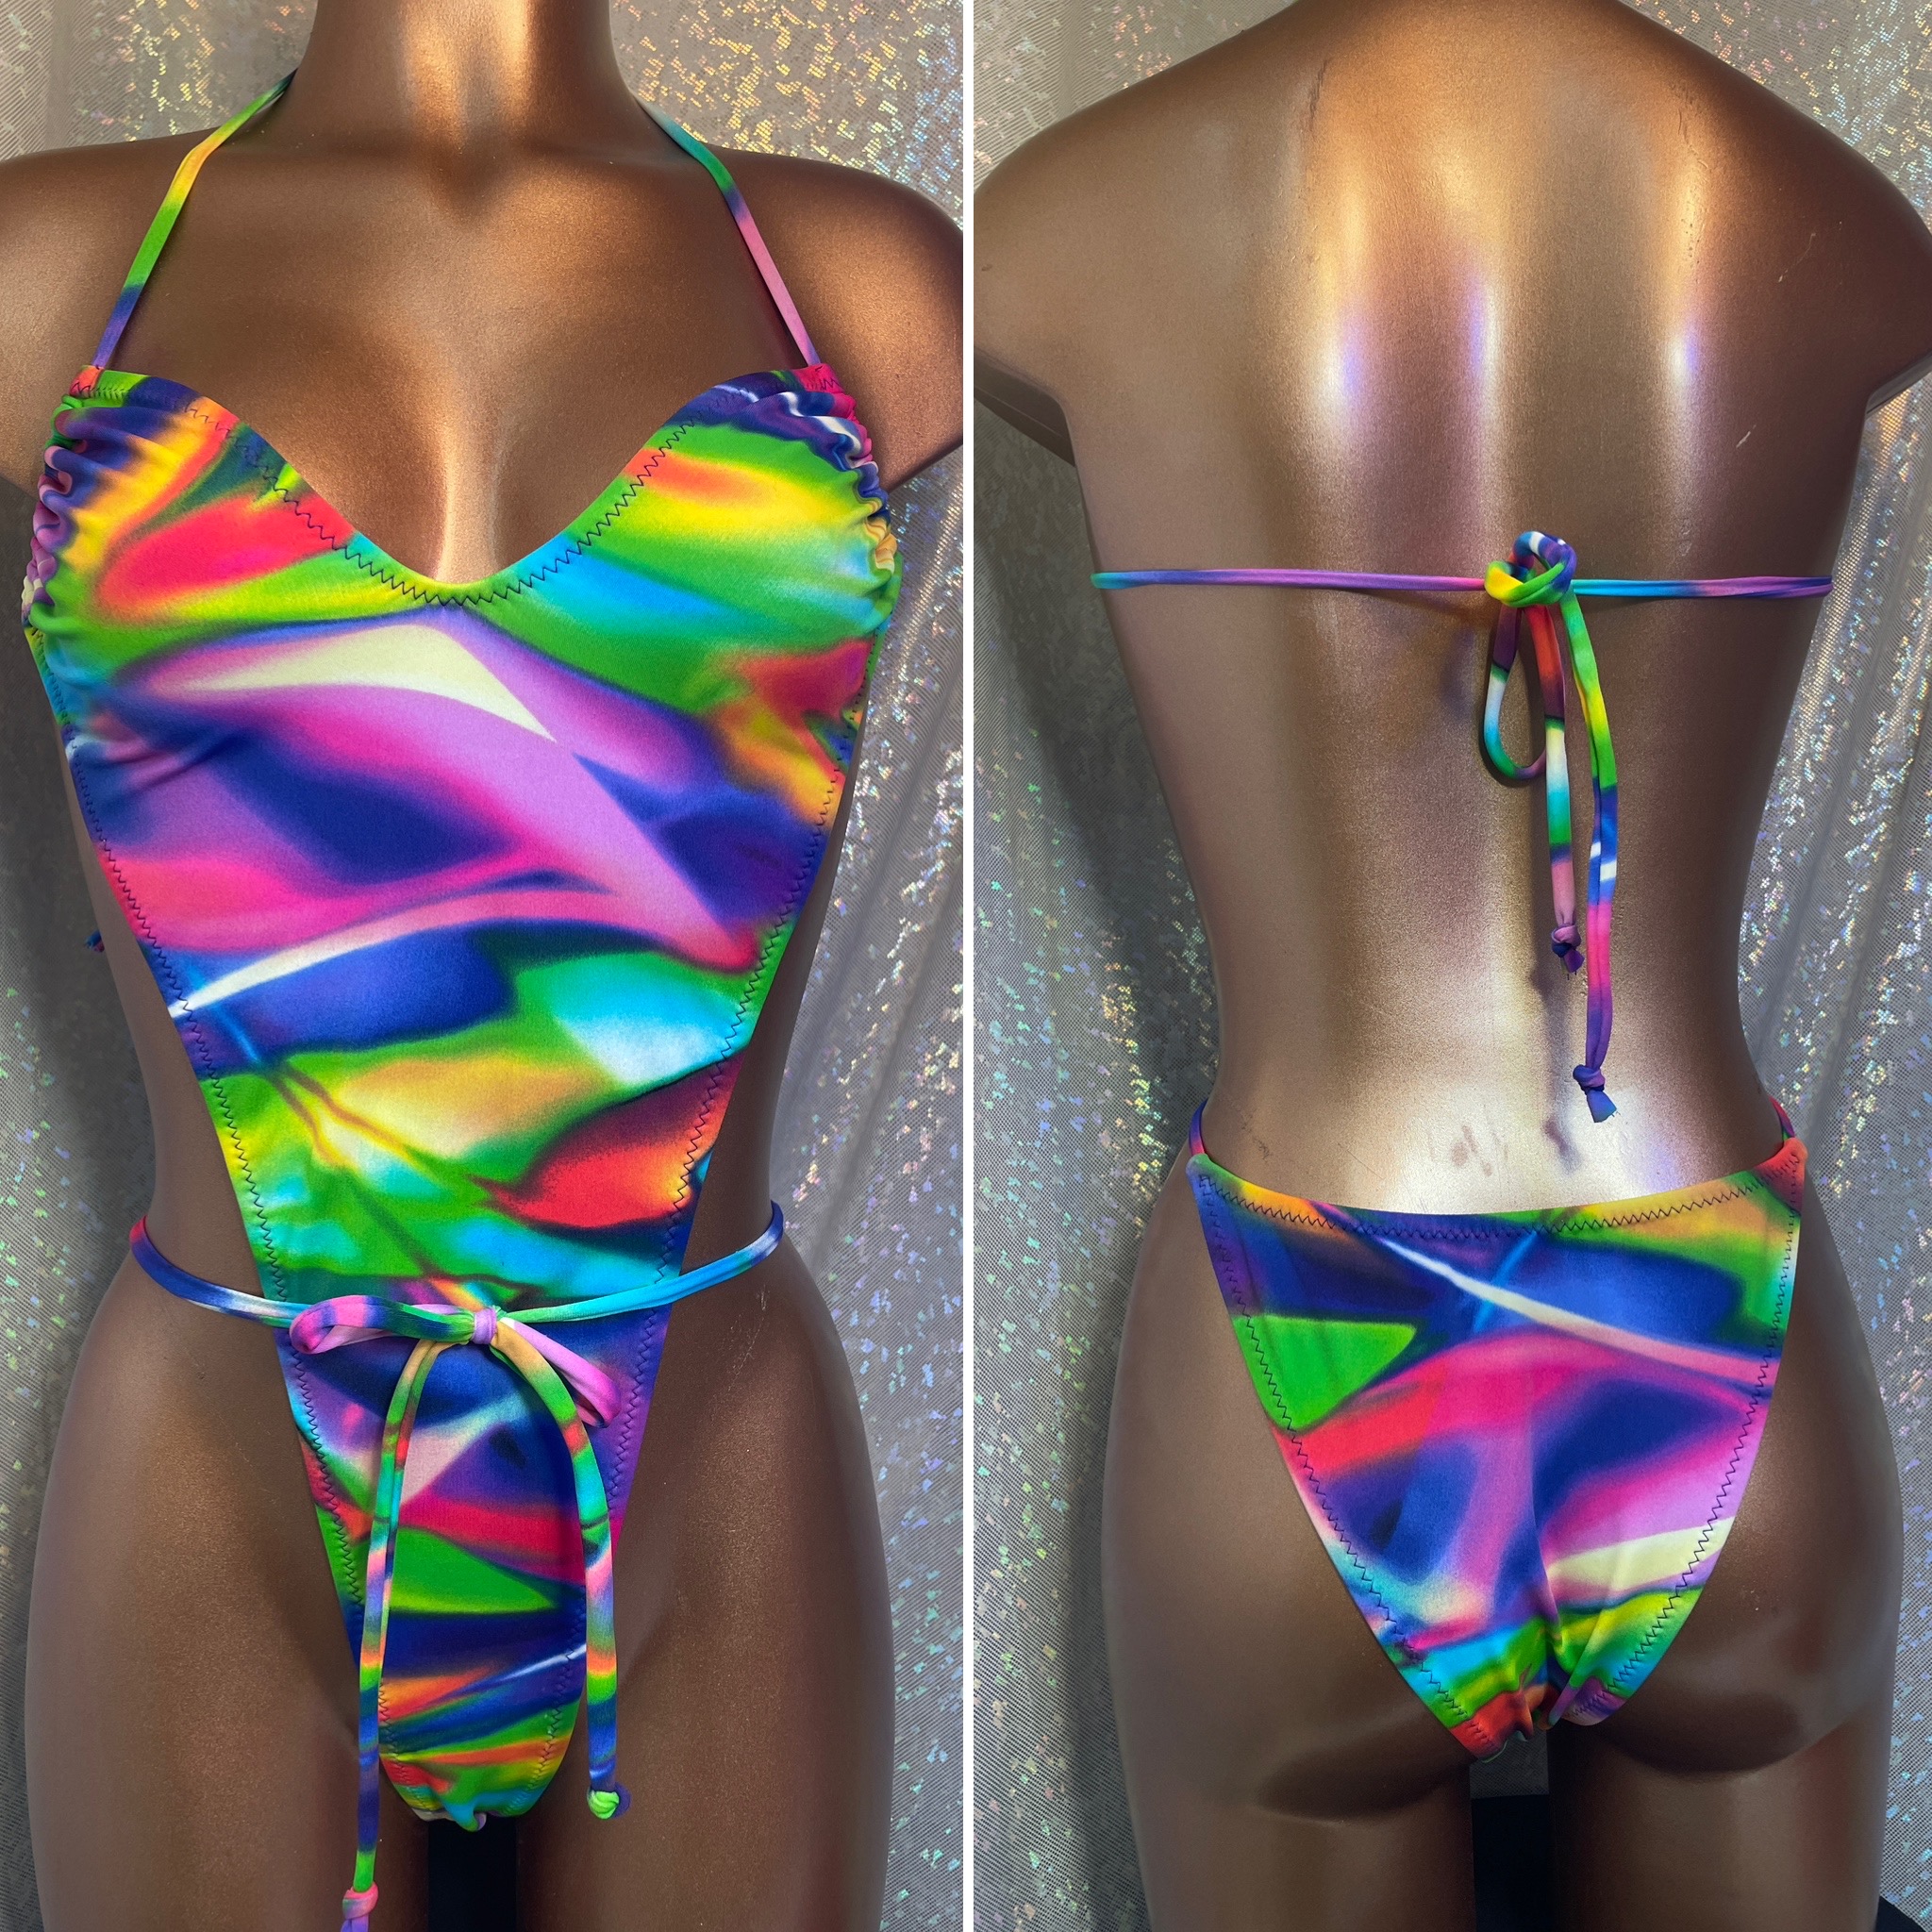 53.  Medium length tie one piece
French cut back
Watercolor print
$65